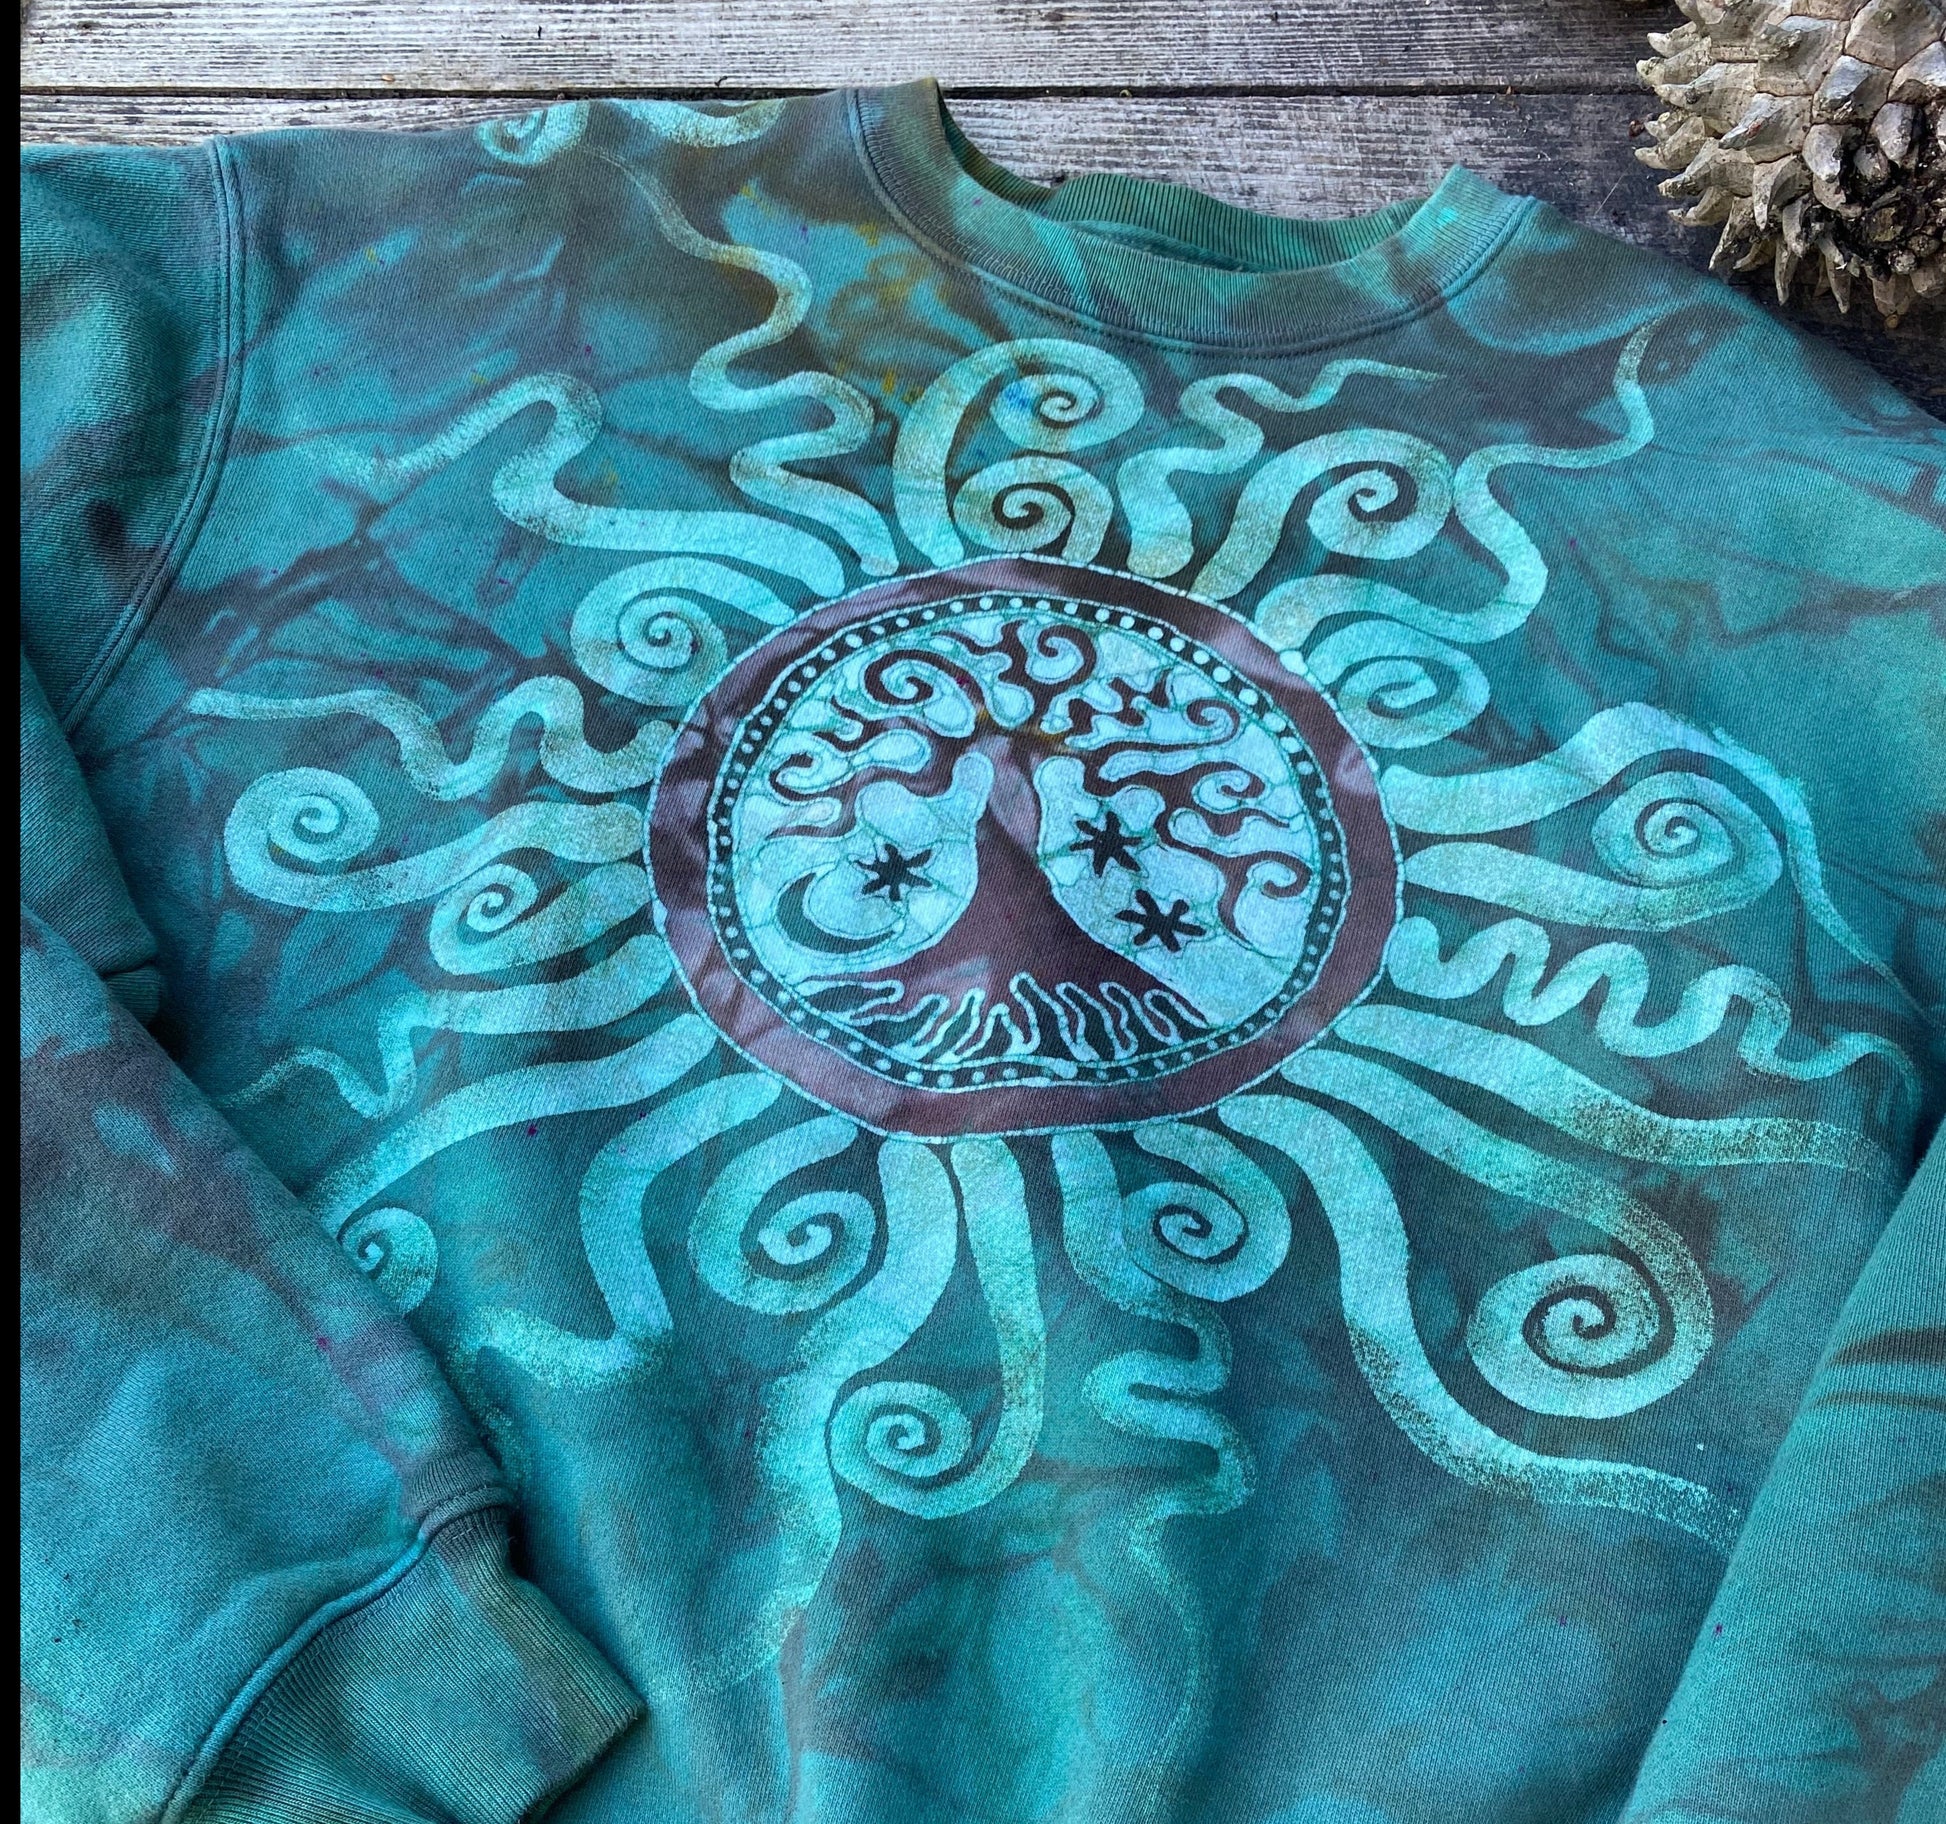 Glowing Moss Green Tree of Life Sweatshirt - Men's Size Small ONLY (runs large) Tops Batikwalla by Victoria 